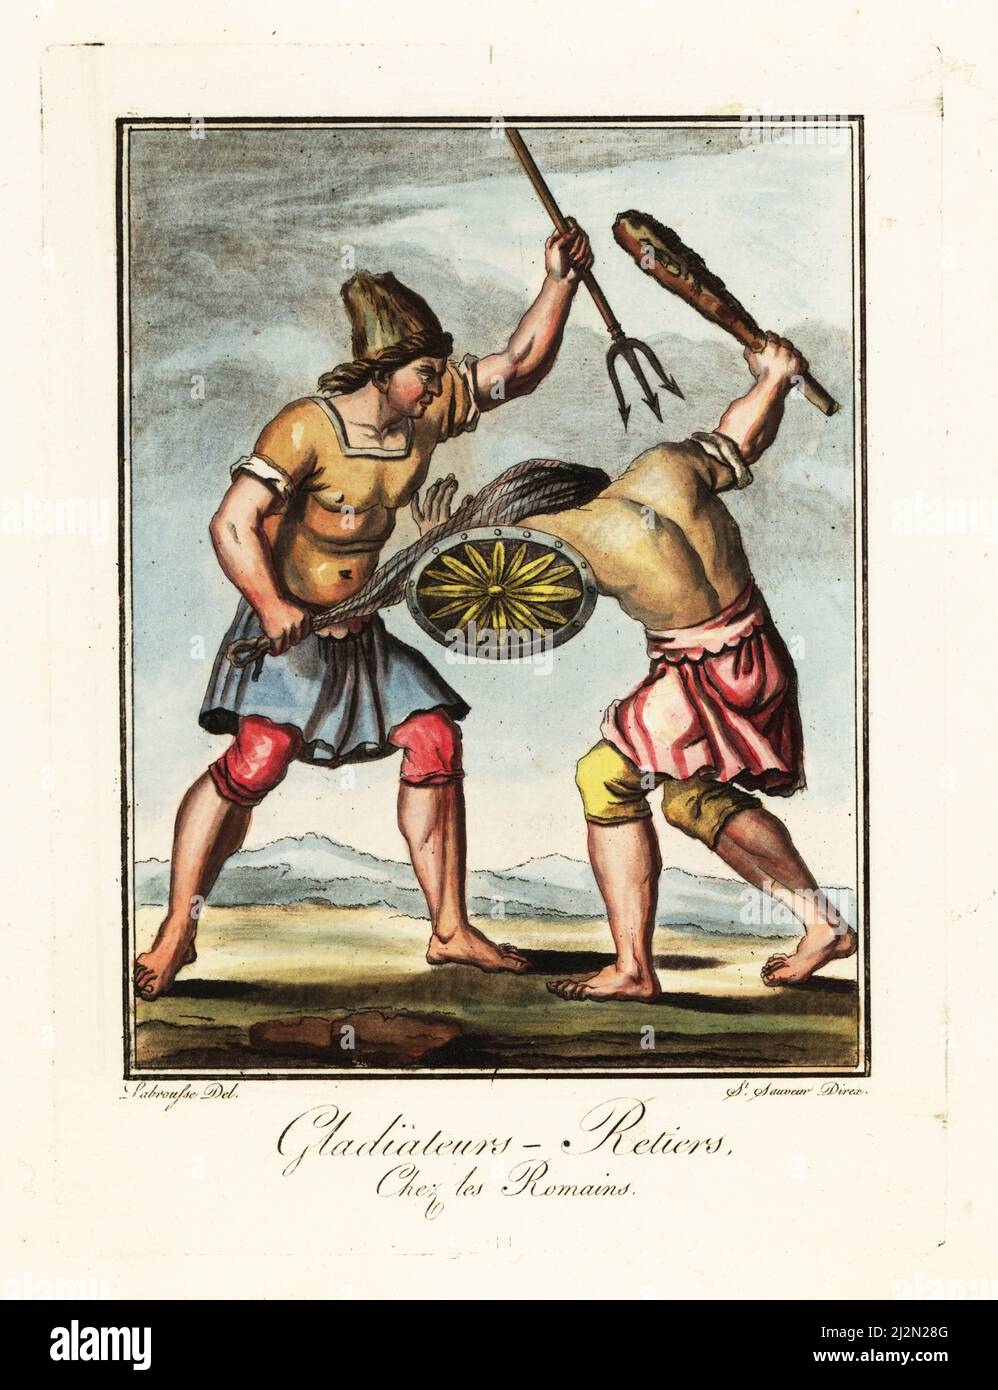 A battle between gladiators in the circus, ancient Rome. A retiarius with net and trident fights a secutor armed with cudgel and shield. Both wear skirts and short trousers or sagulum gregale. Gladiateurs: Retiers chez les Romains. Handcoloured copperplate drawn and engraved by L. Labrousse, artist of Bordeaux, under the direction of Jacques Grasset de Saint-Sauveur from his L’antique Rome, ou description historique et pittoresque, Ancient Rome, or historical and picturesque description, Chez Deroy, Paris, 1796. Stock Photo